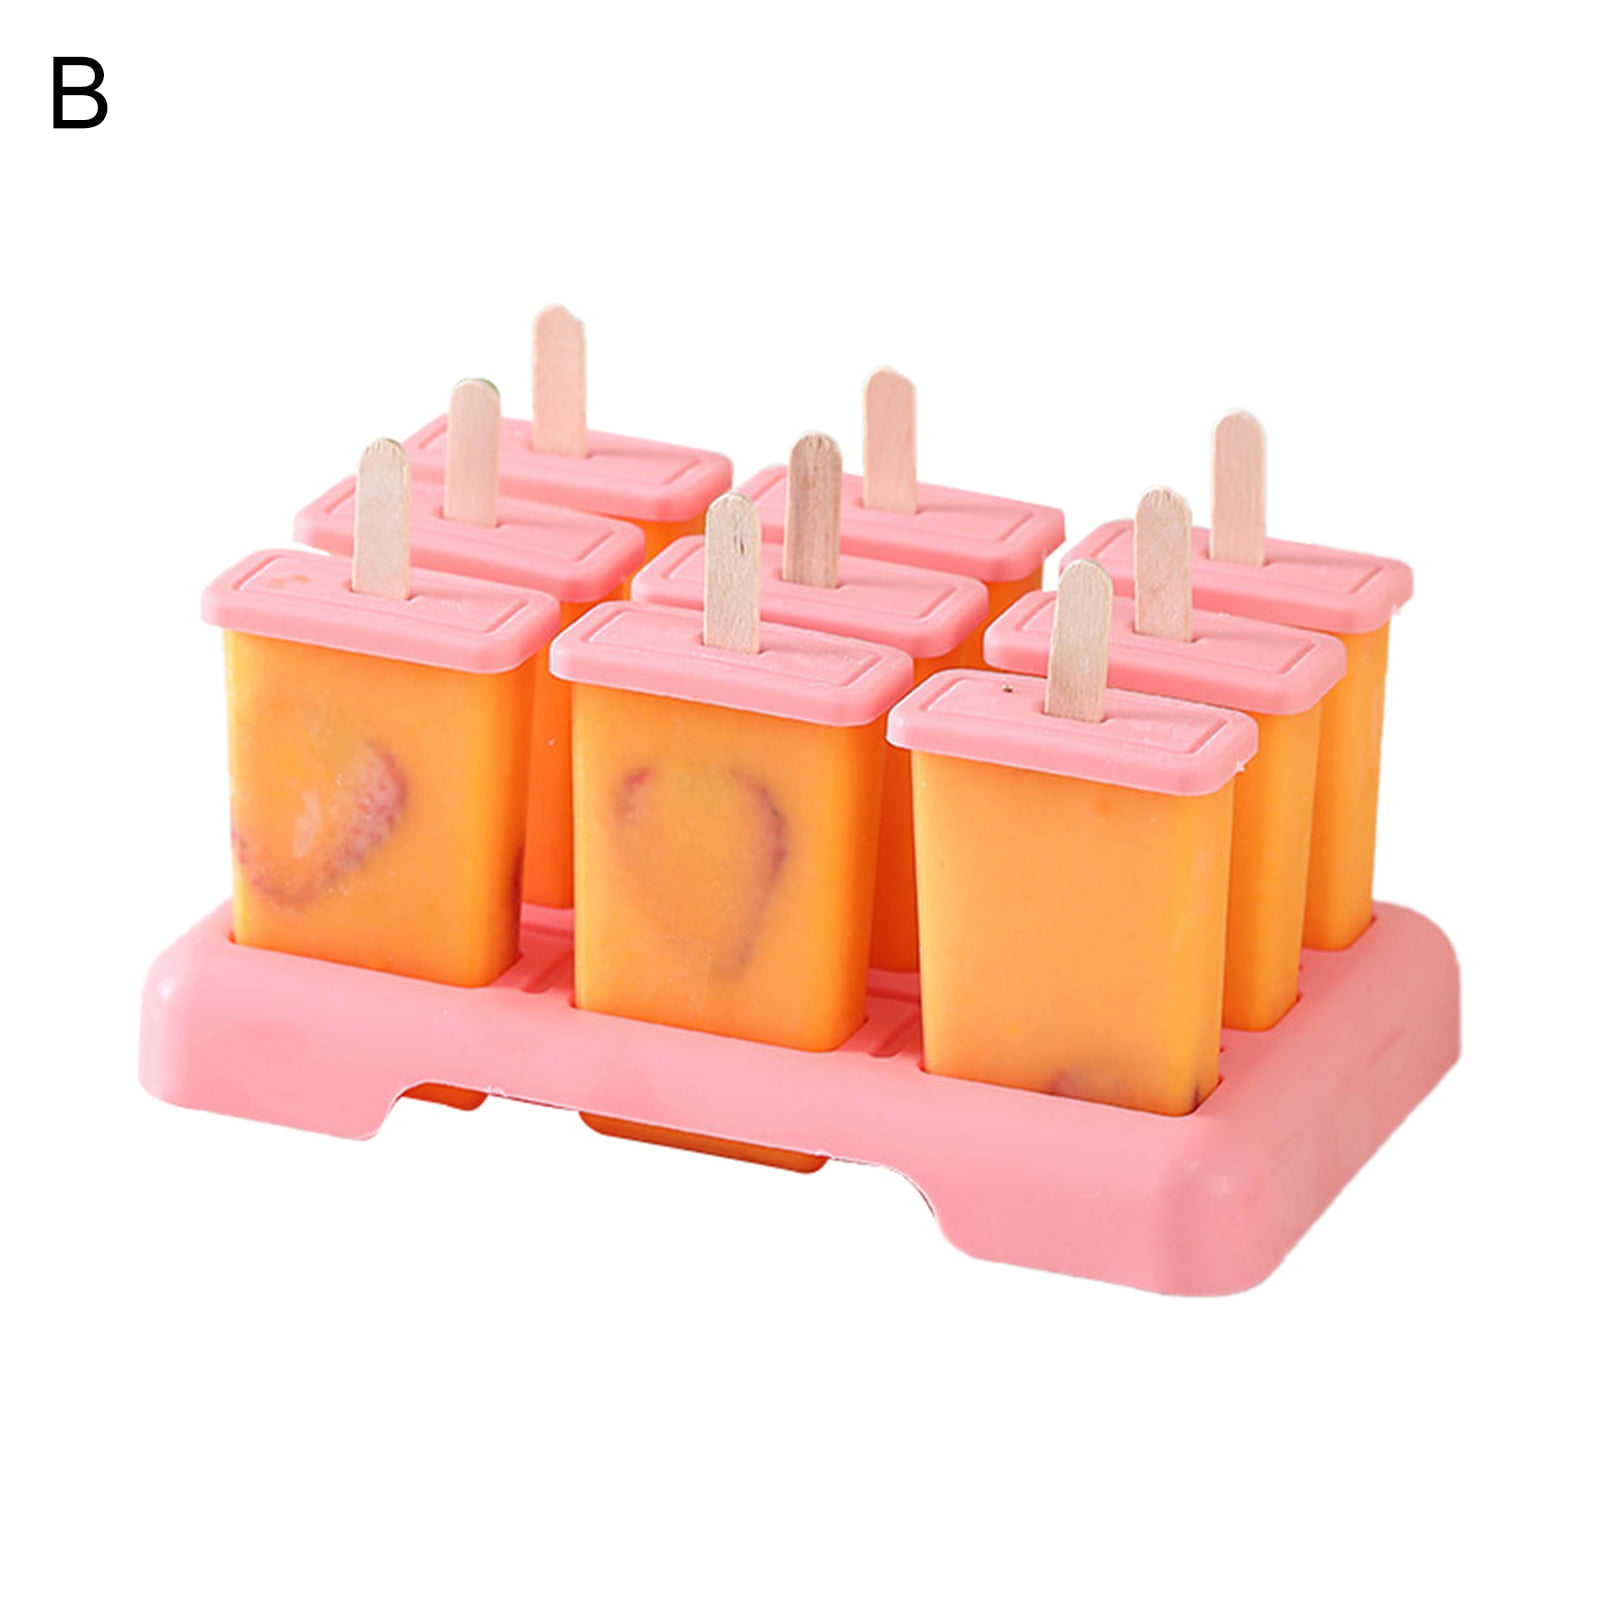 MEETRUE Popsicle Molds for Toddlers Kids, 9-Cavity Popsicles Molds Silicone BPA Free Popsicle Maker Mold Set Ice Pop Mold Ice Popsicle Maker Handmade